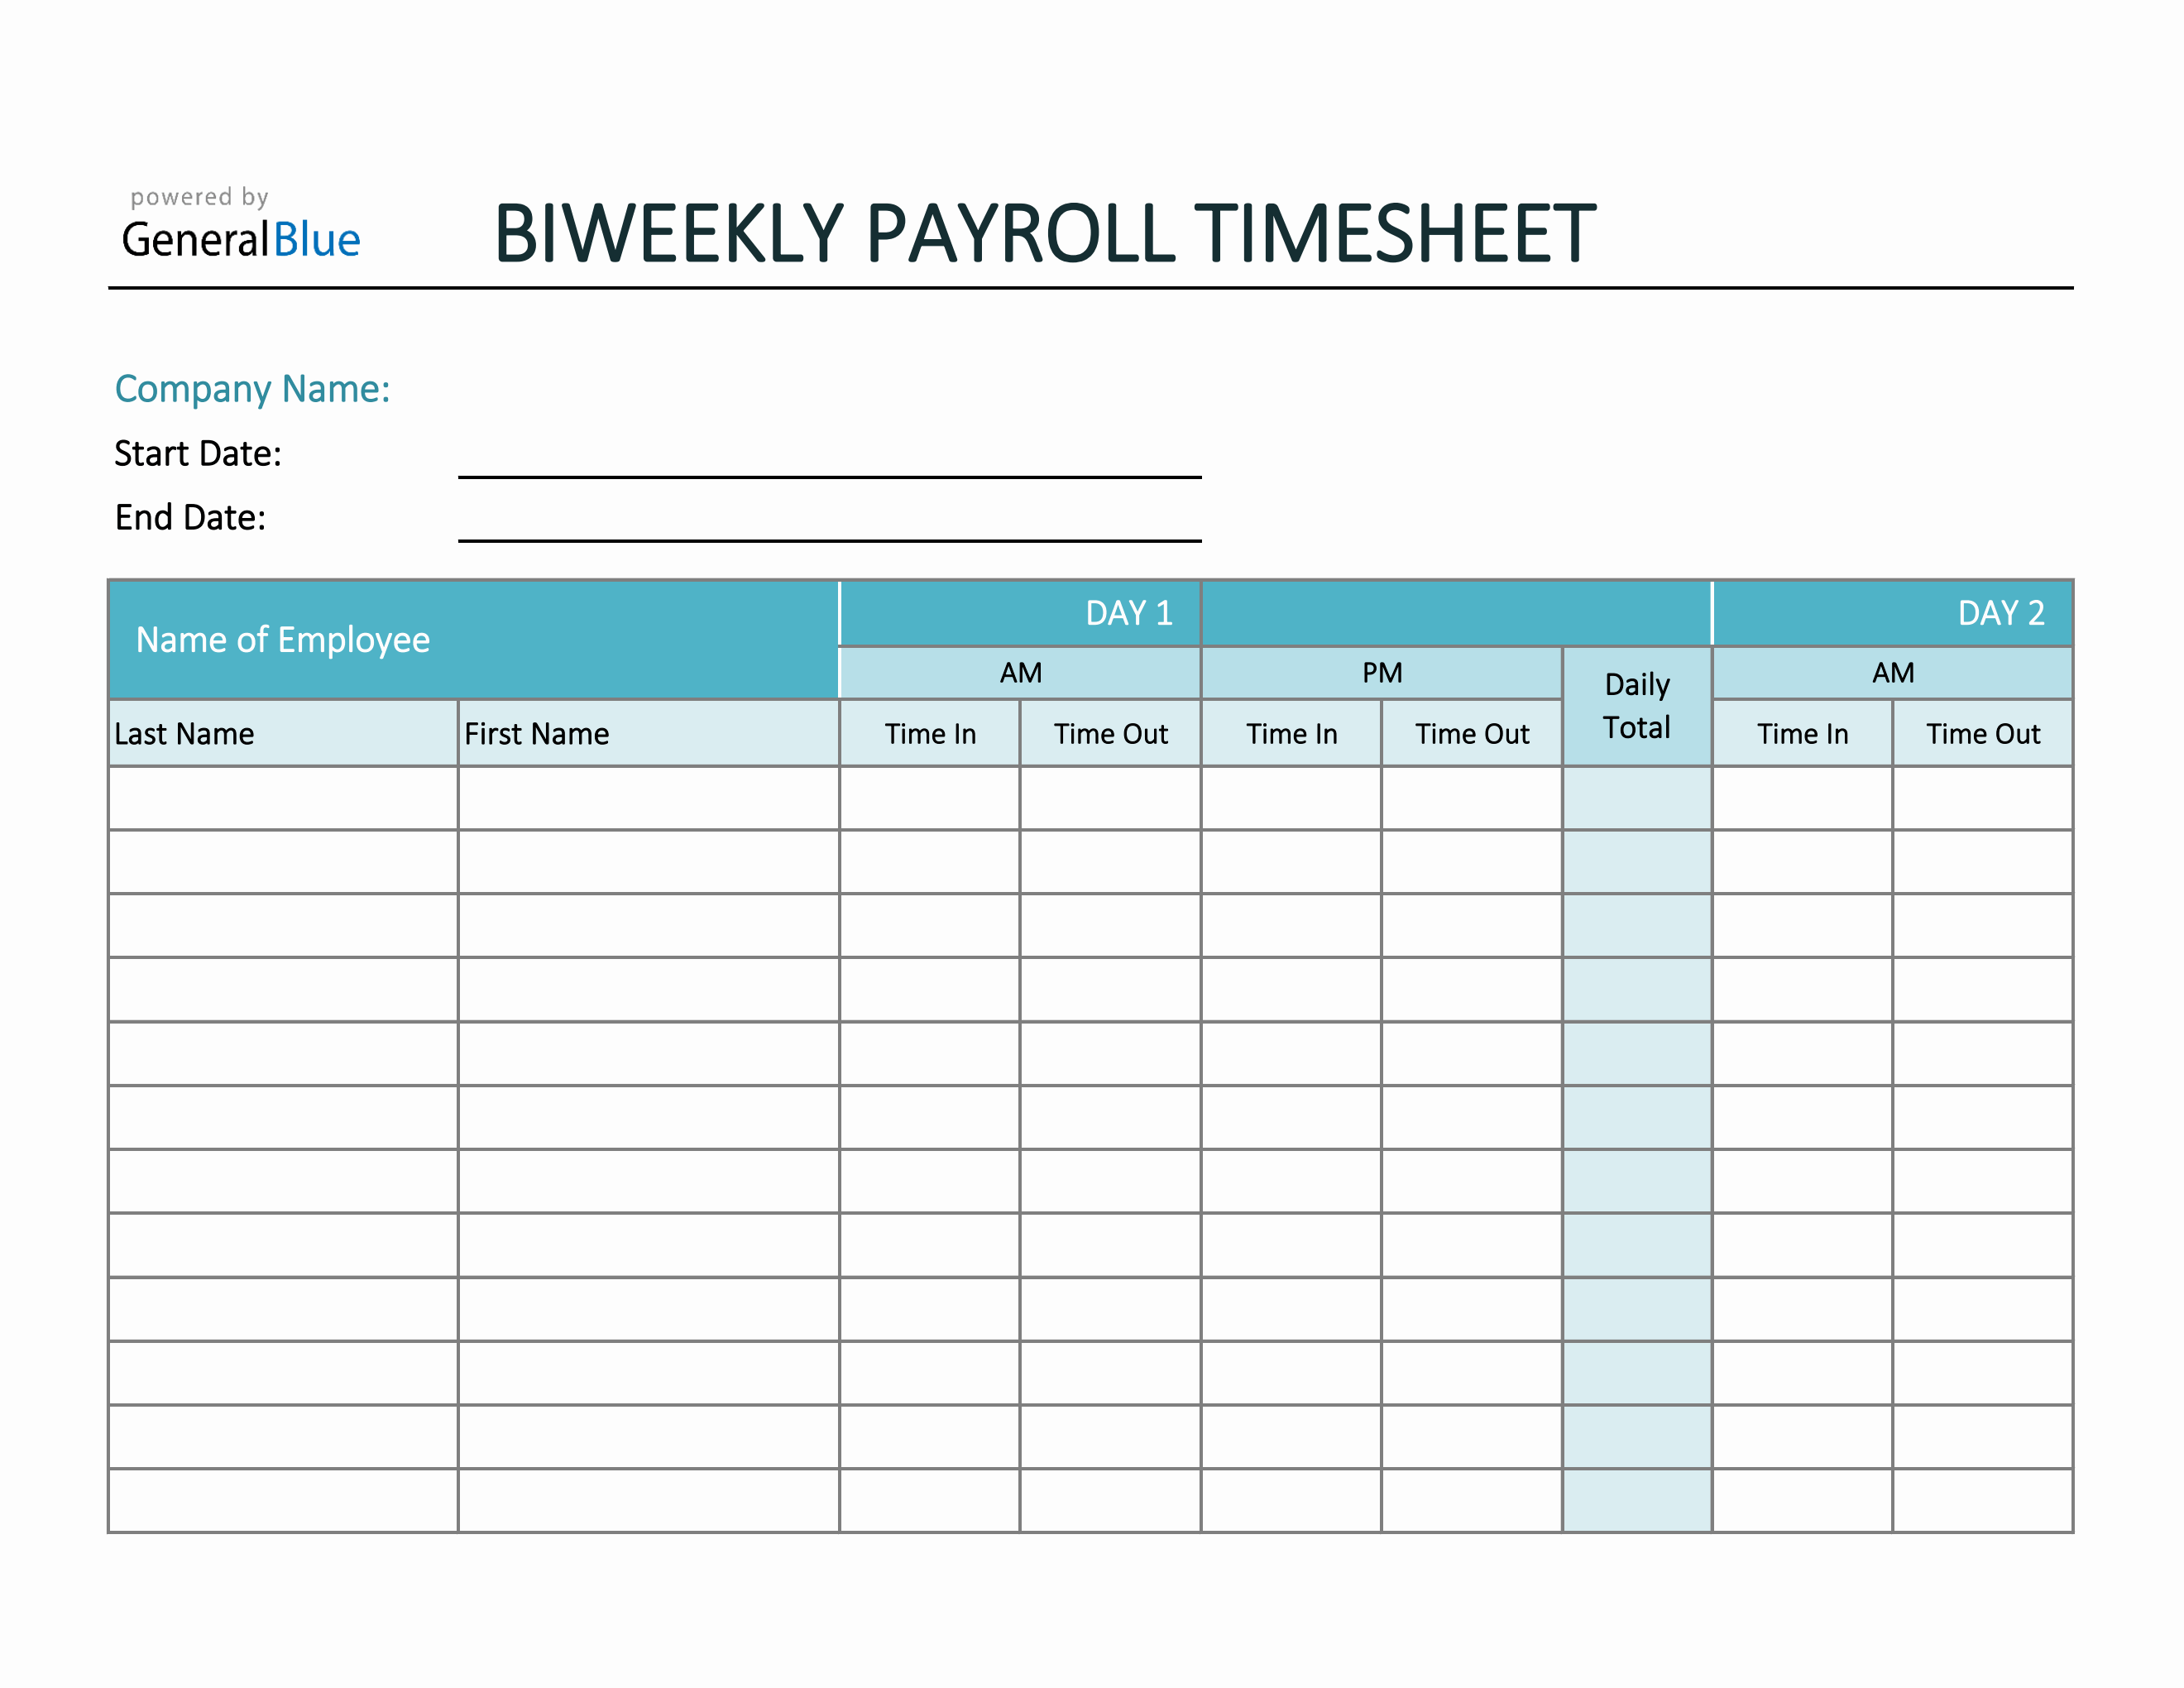 Excel Biweekly Payroll Timesheet for Multiple Employees